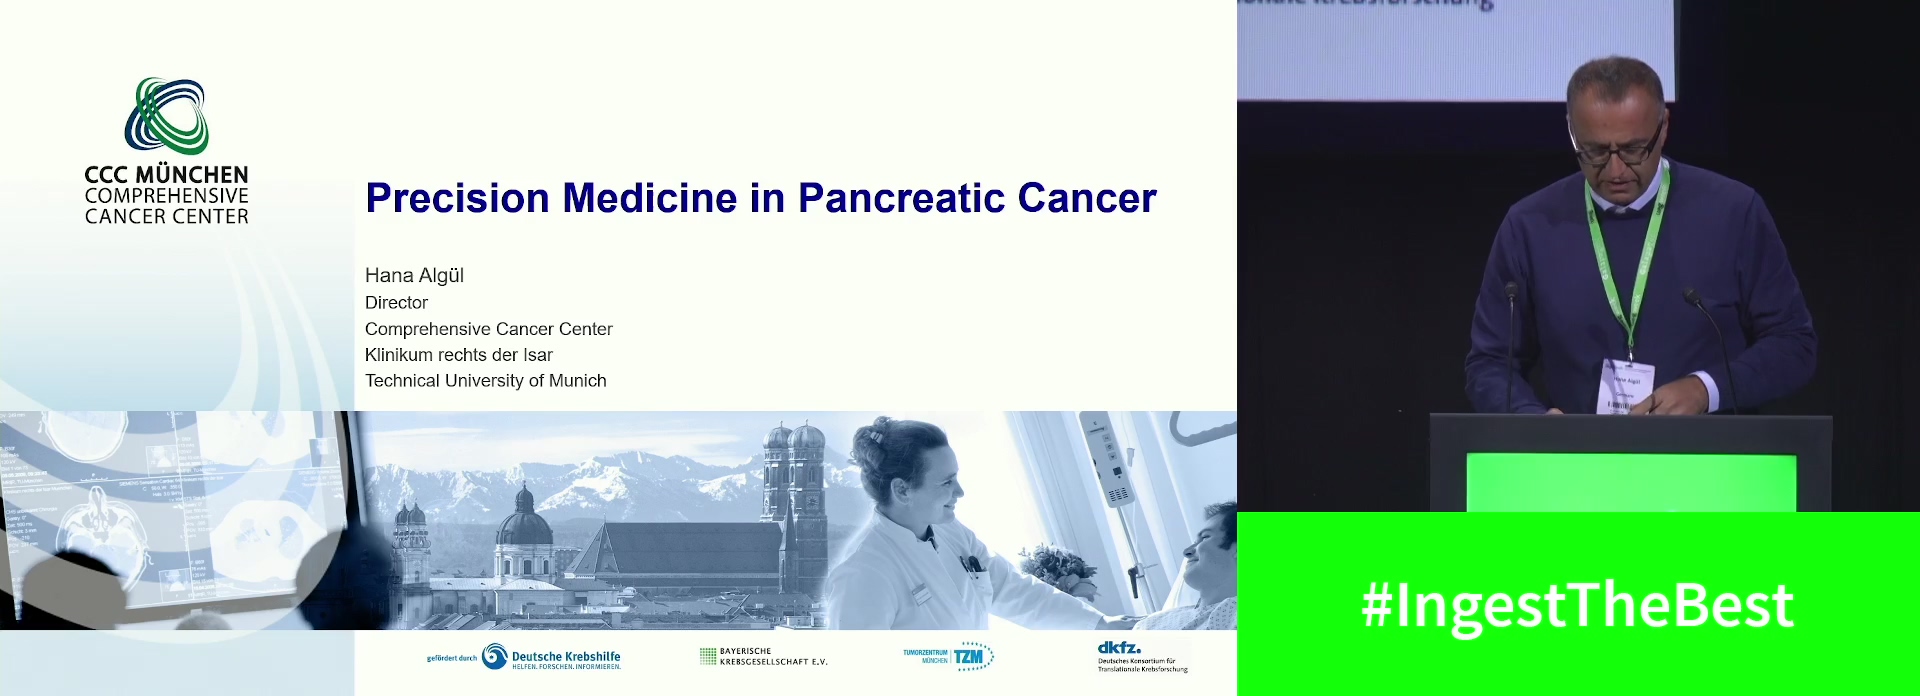 Precision oncology in pancreatic cancer